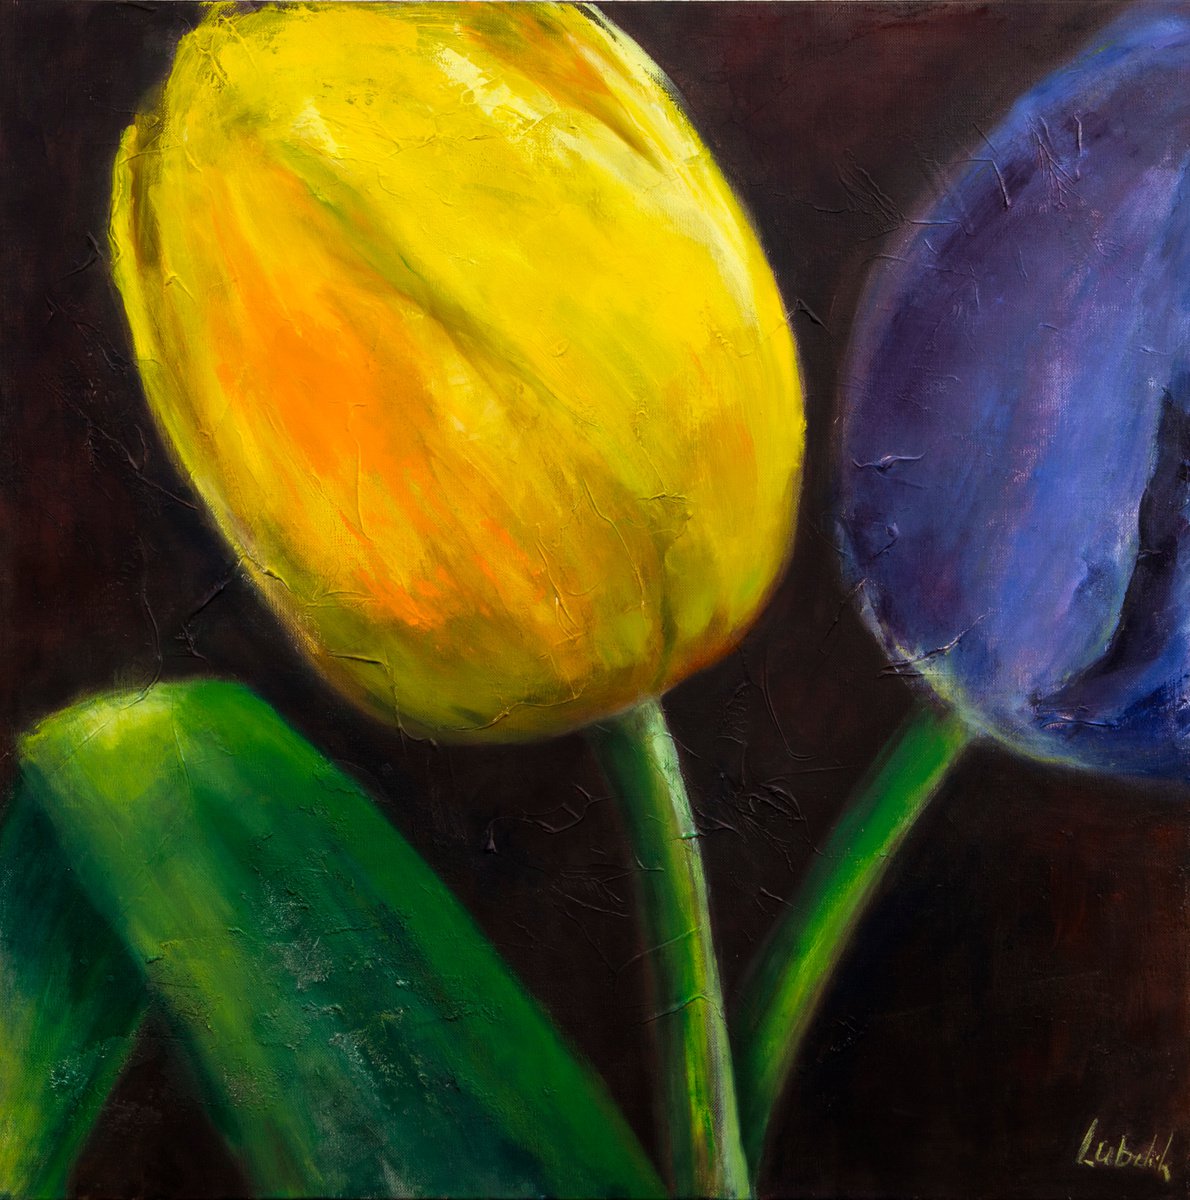 Abstract Floral painting Tulips by Anna Lubchik